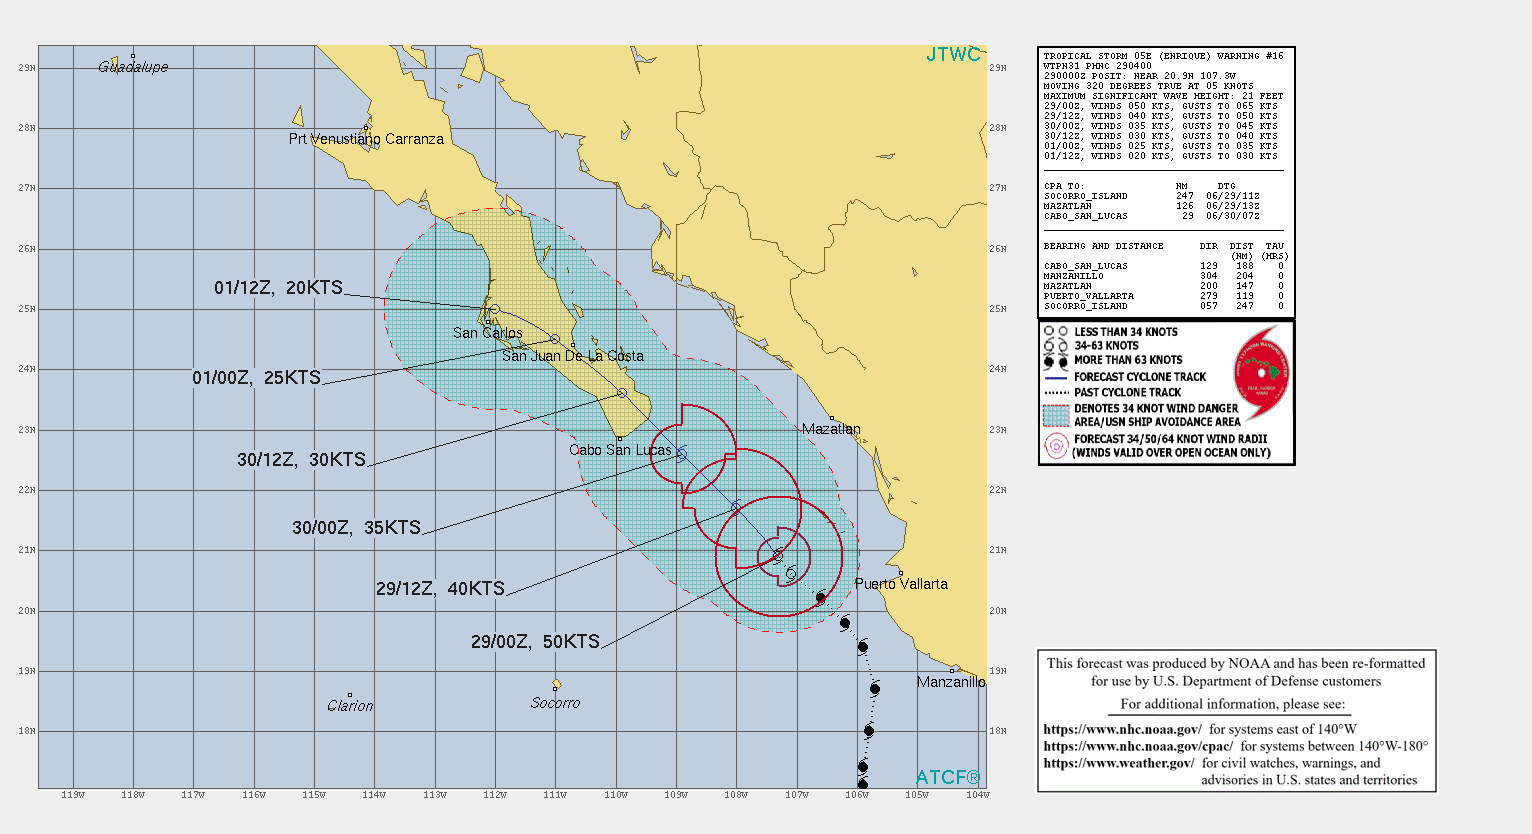 EASTERN NORTH PACIFIC: 05E(ENRIQUE). WEAKENING TROPICAL STORM.